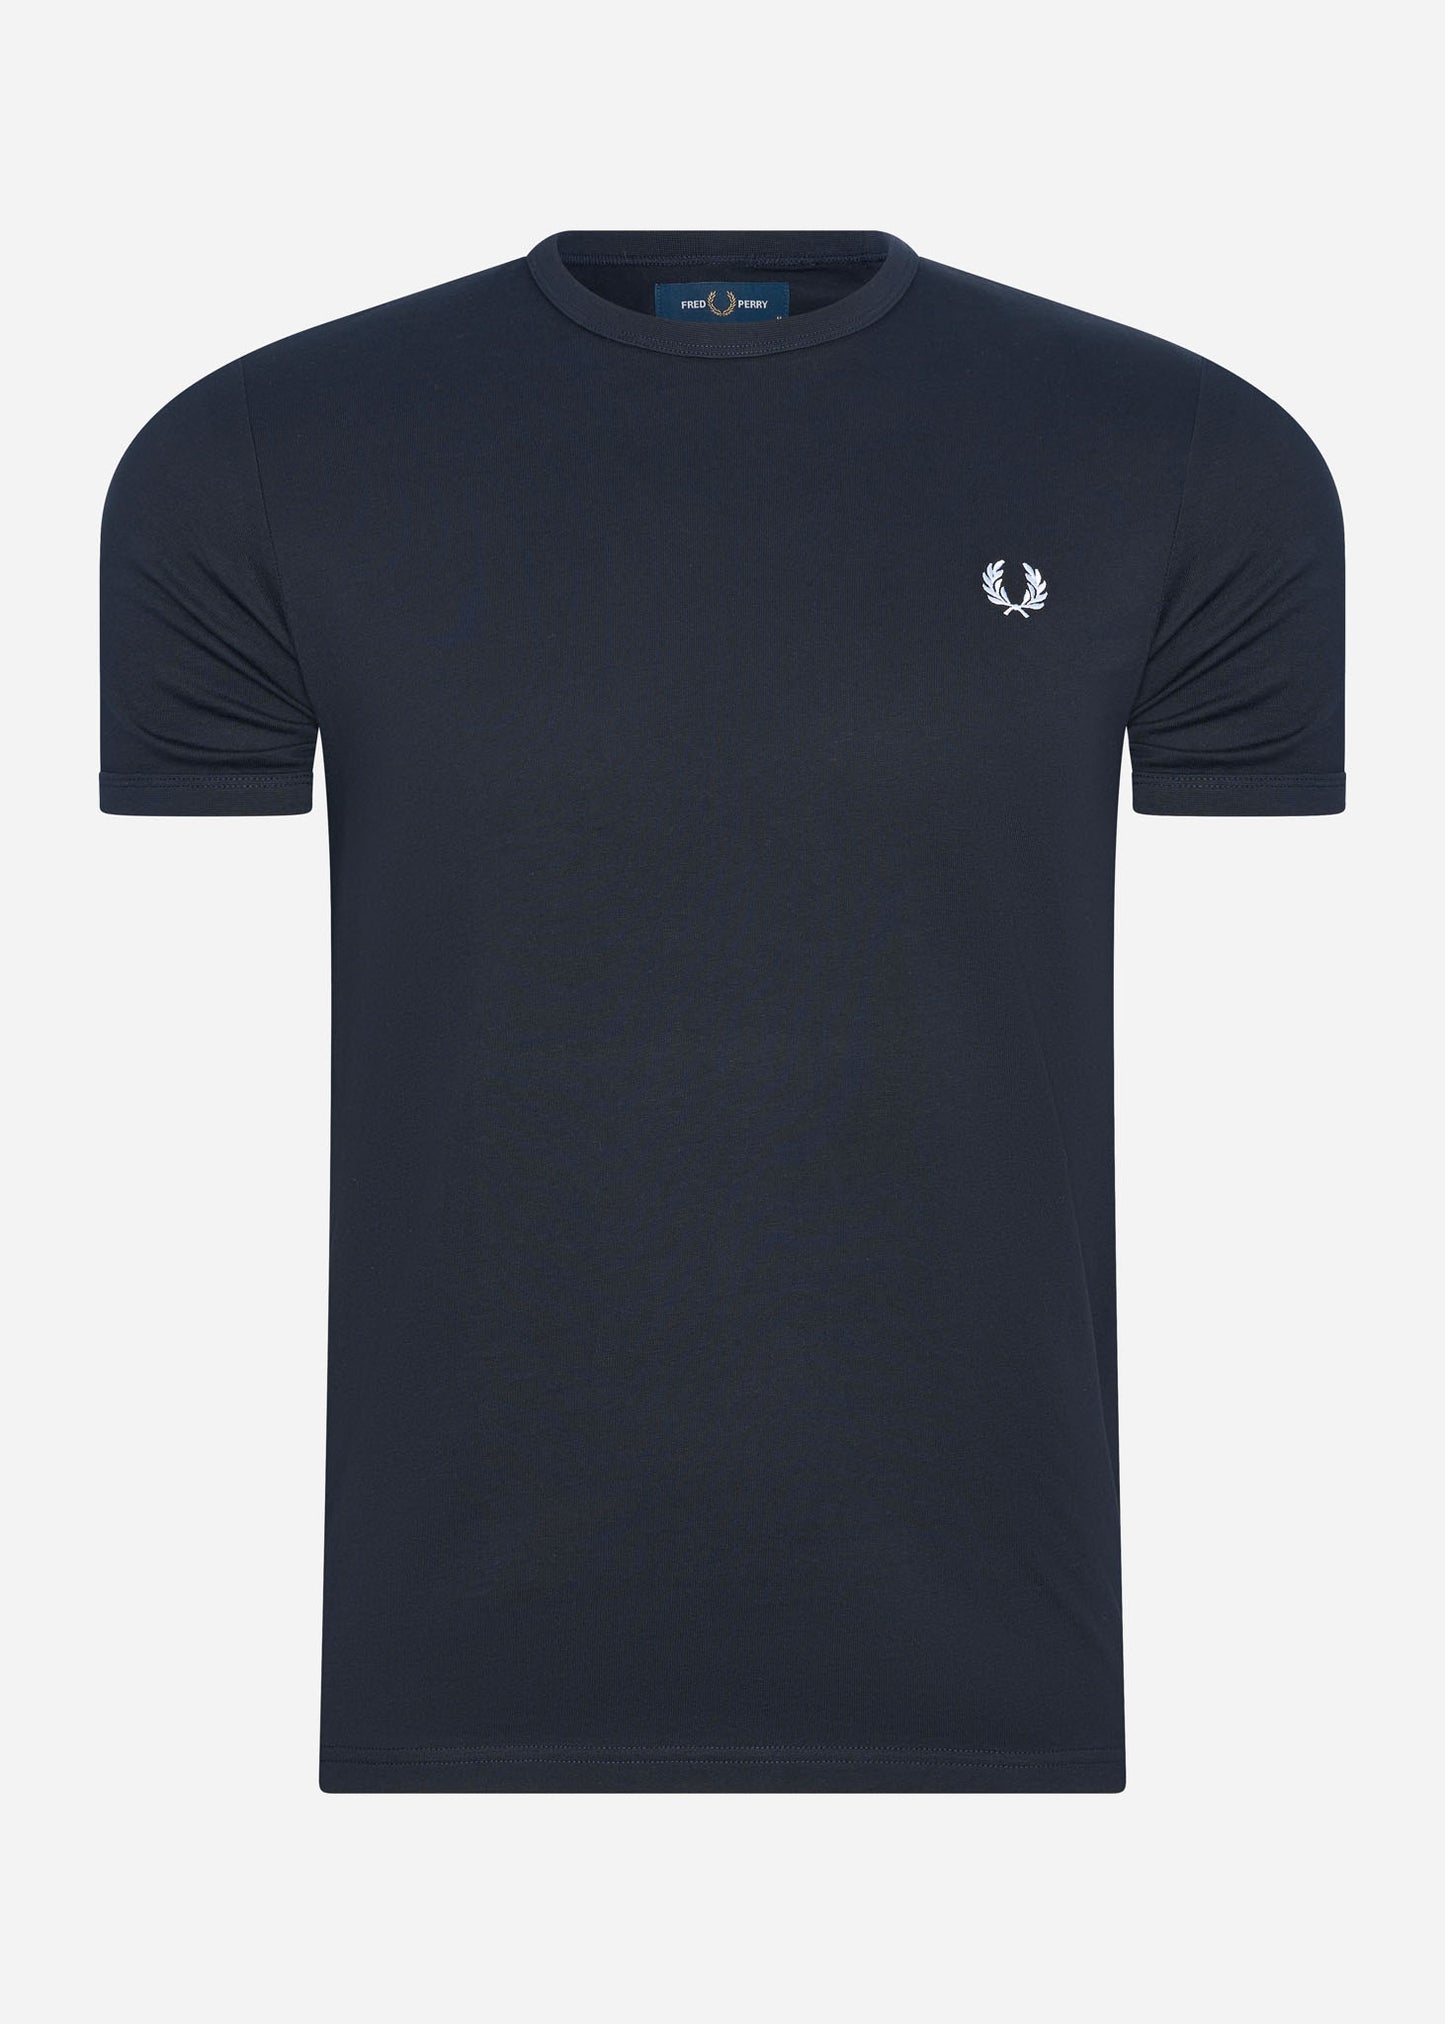 fred perry t-shirt navy 